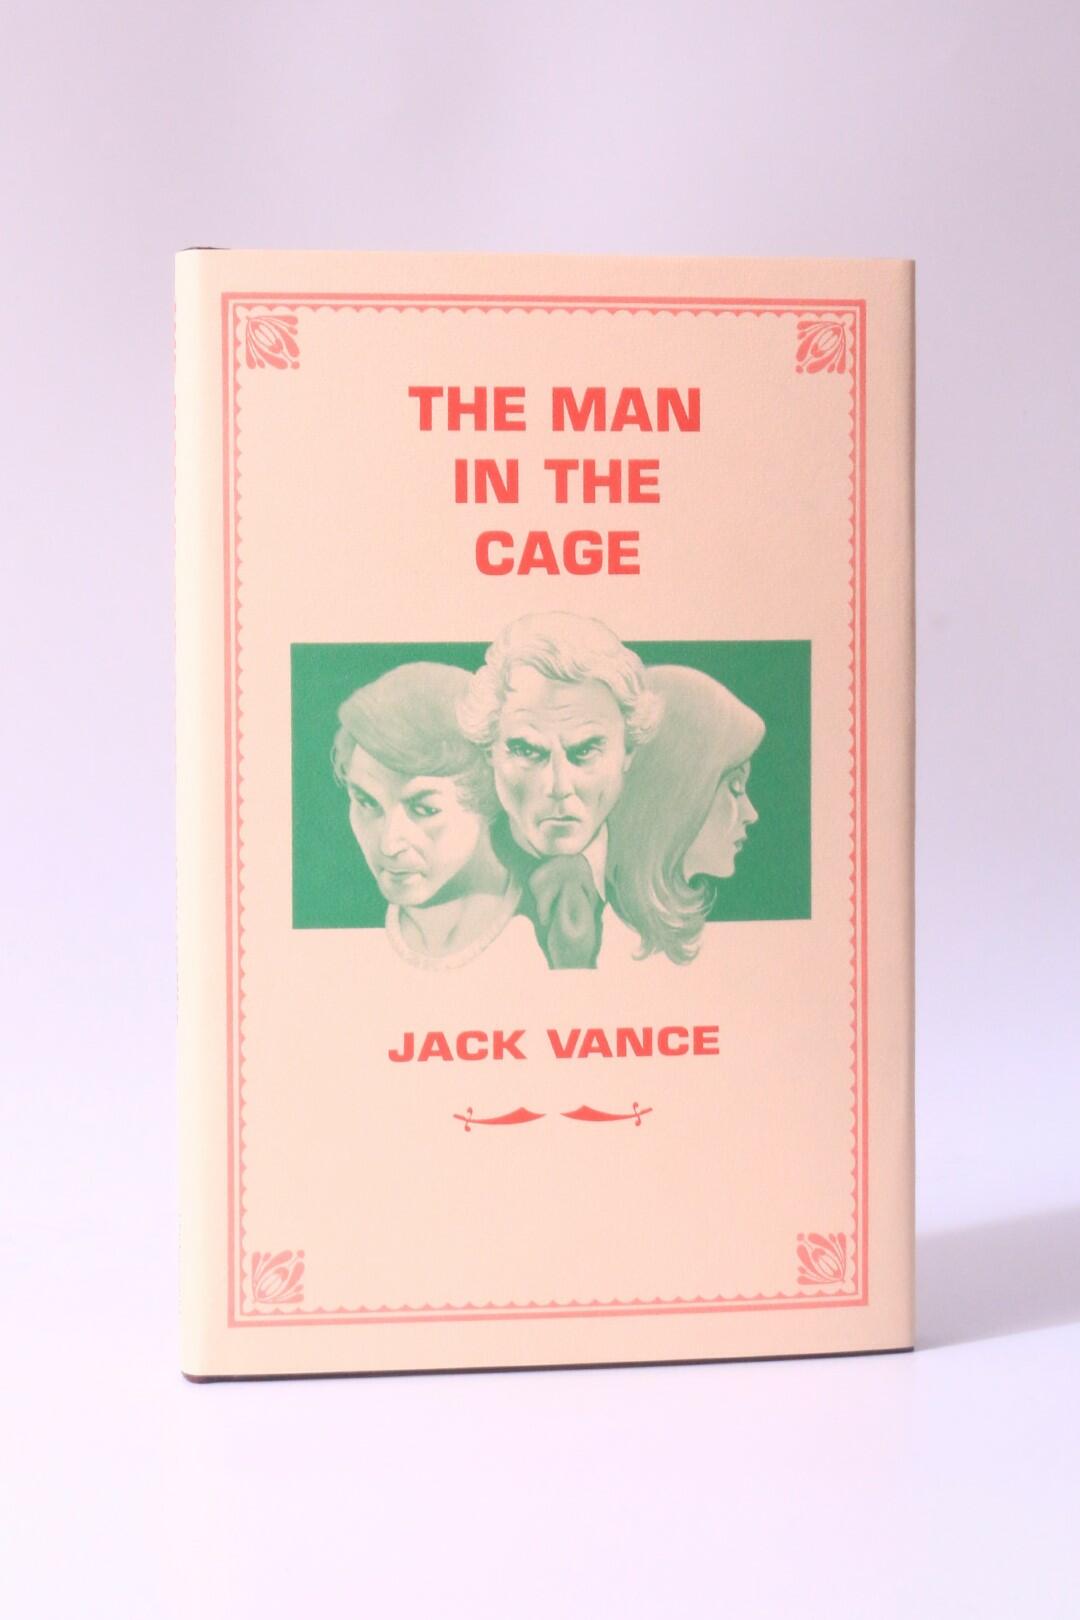 Jack Vance - The Man in the Cage - Underwood-Miller, 1983, Signed Limited Edition.